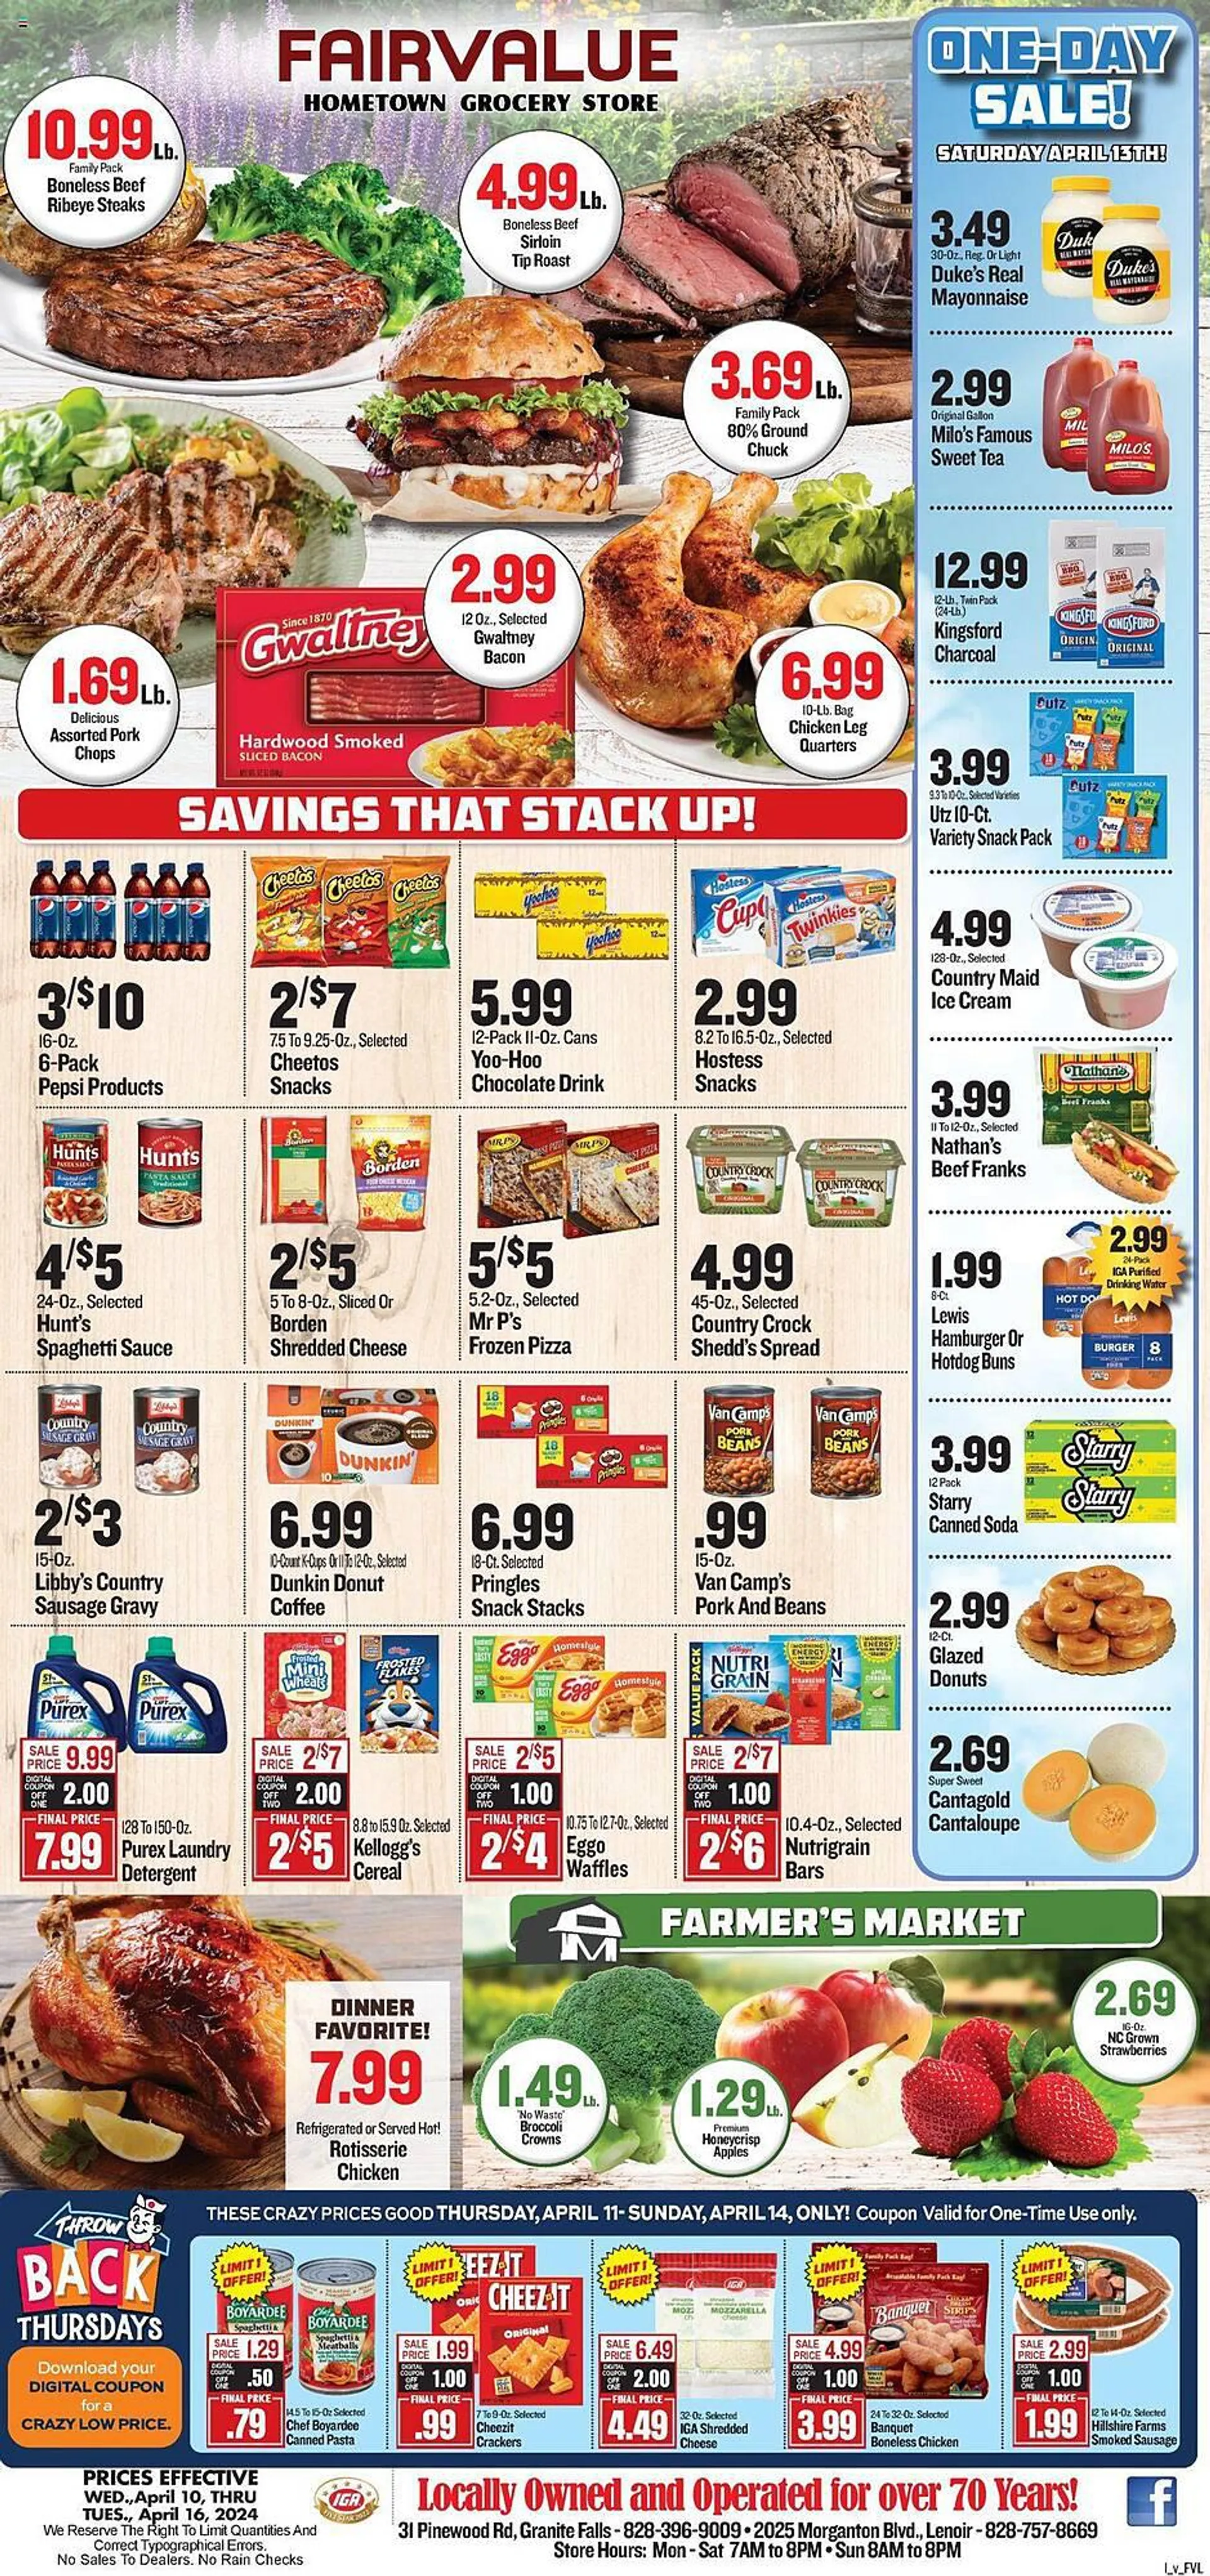 Weekly ad IGA Weekly Ad from April 10 to April 16 2024 - Page 